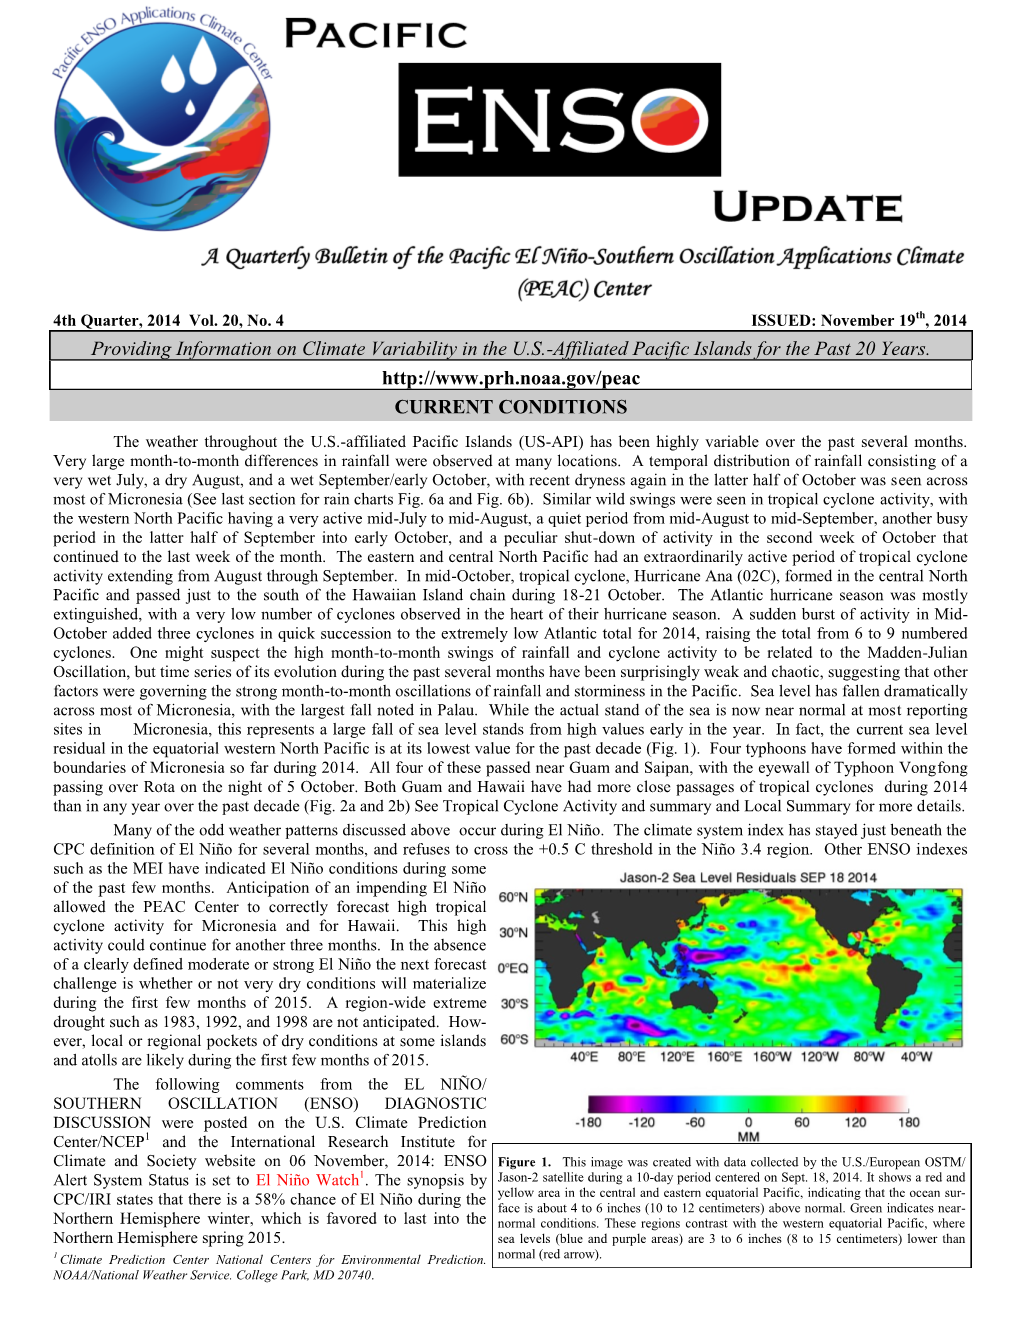 CURRENT CONDITIONS Providing Information on Climate Variability in the U.S.-Affiliated Pacific Isla